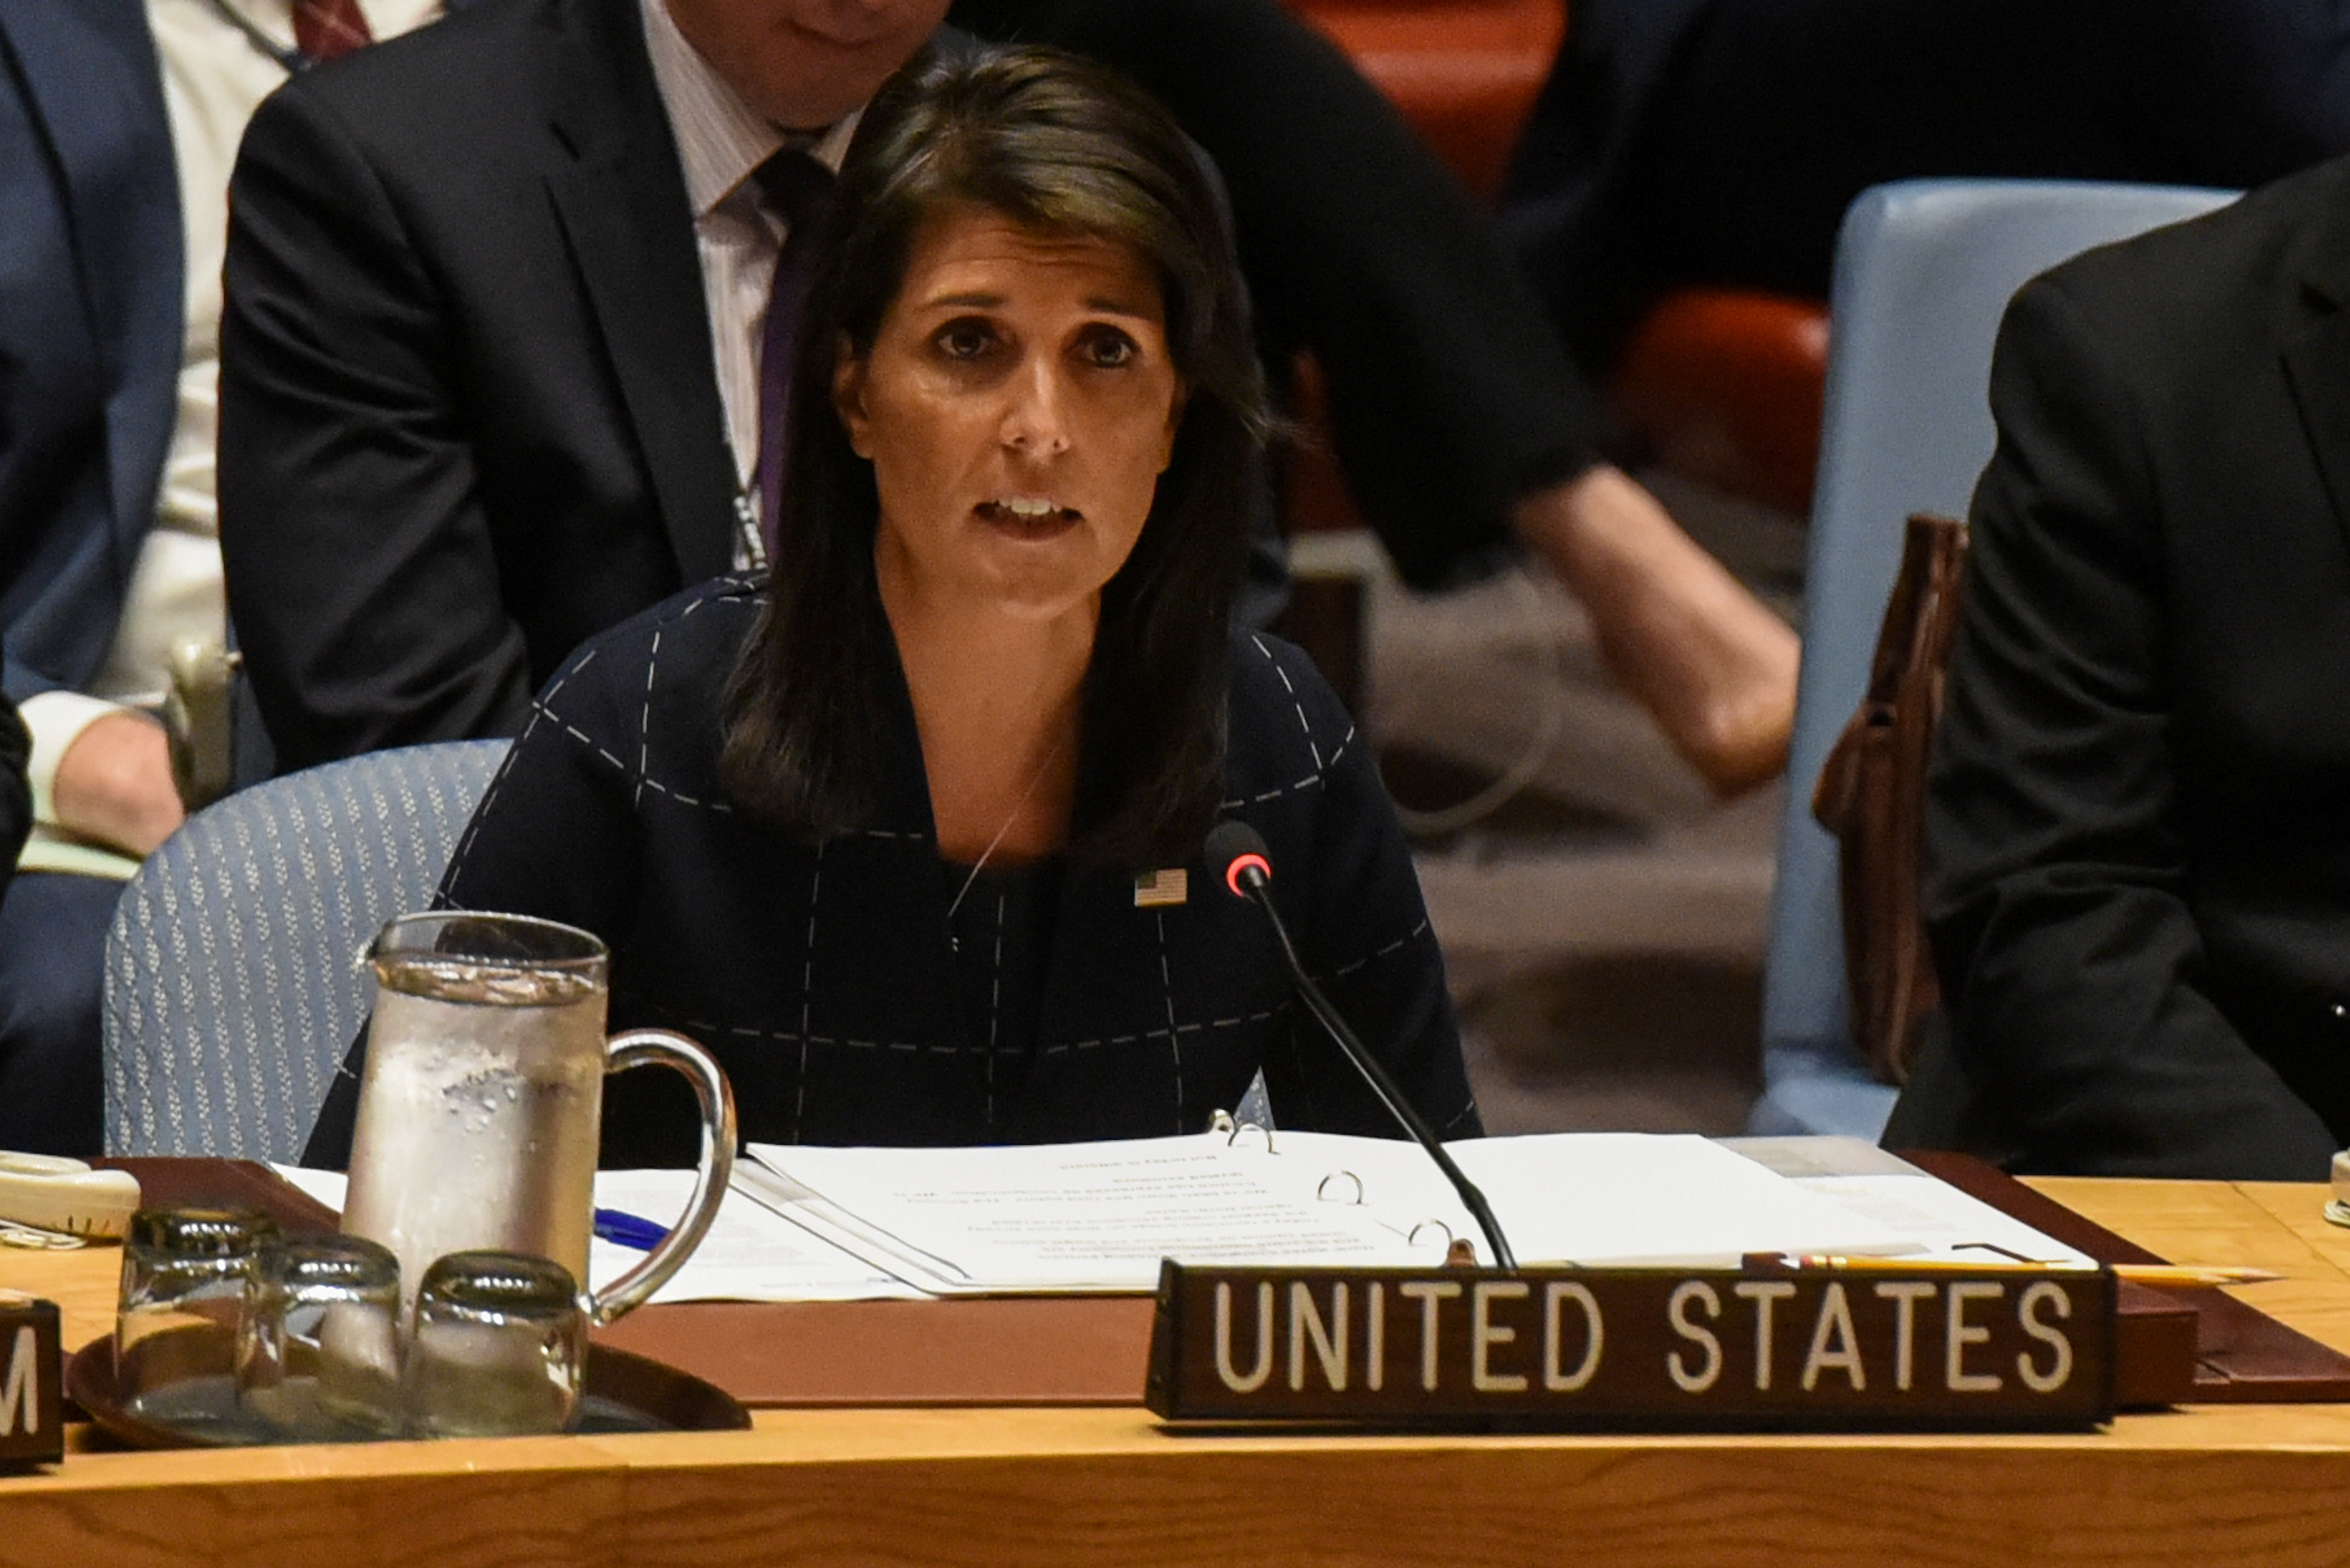 U.S. Ambassador to the UN, Nikki Haley, delivers remarks during a United Nations Security Council meeting on North Korea in New York City on Sept. 11, 2017. (REUTERS/Stephanie Keith)